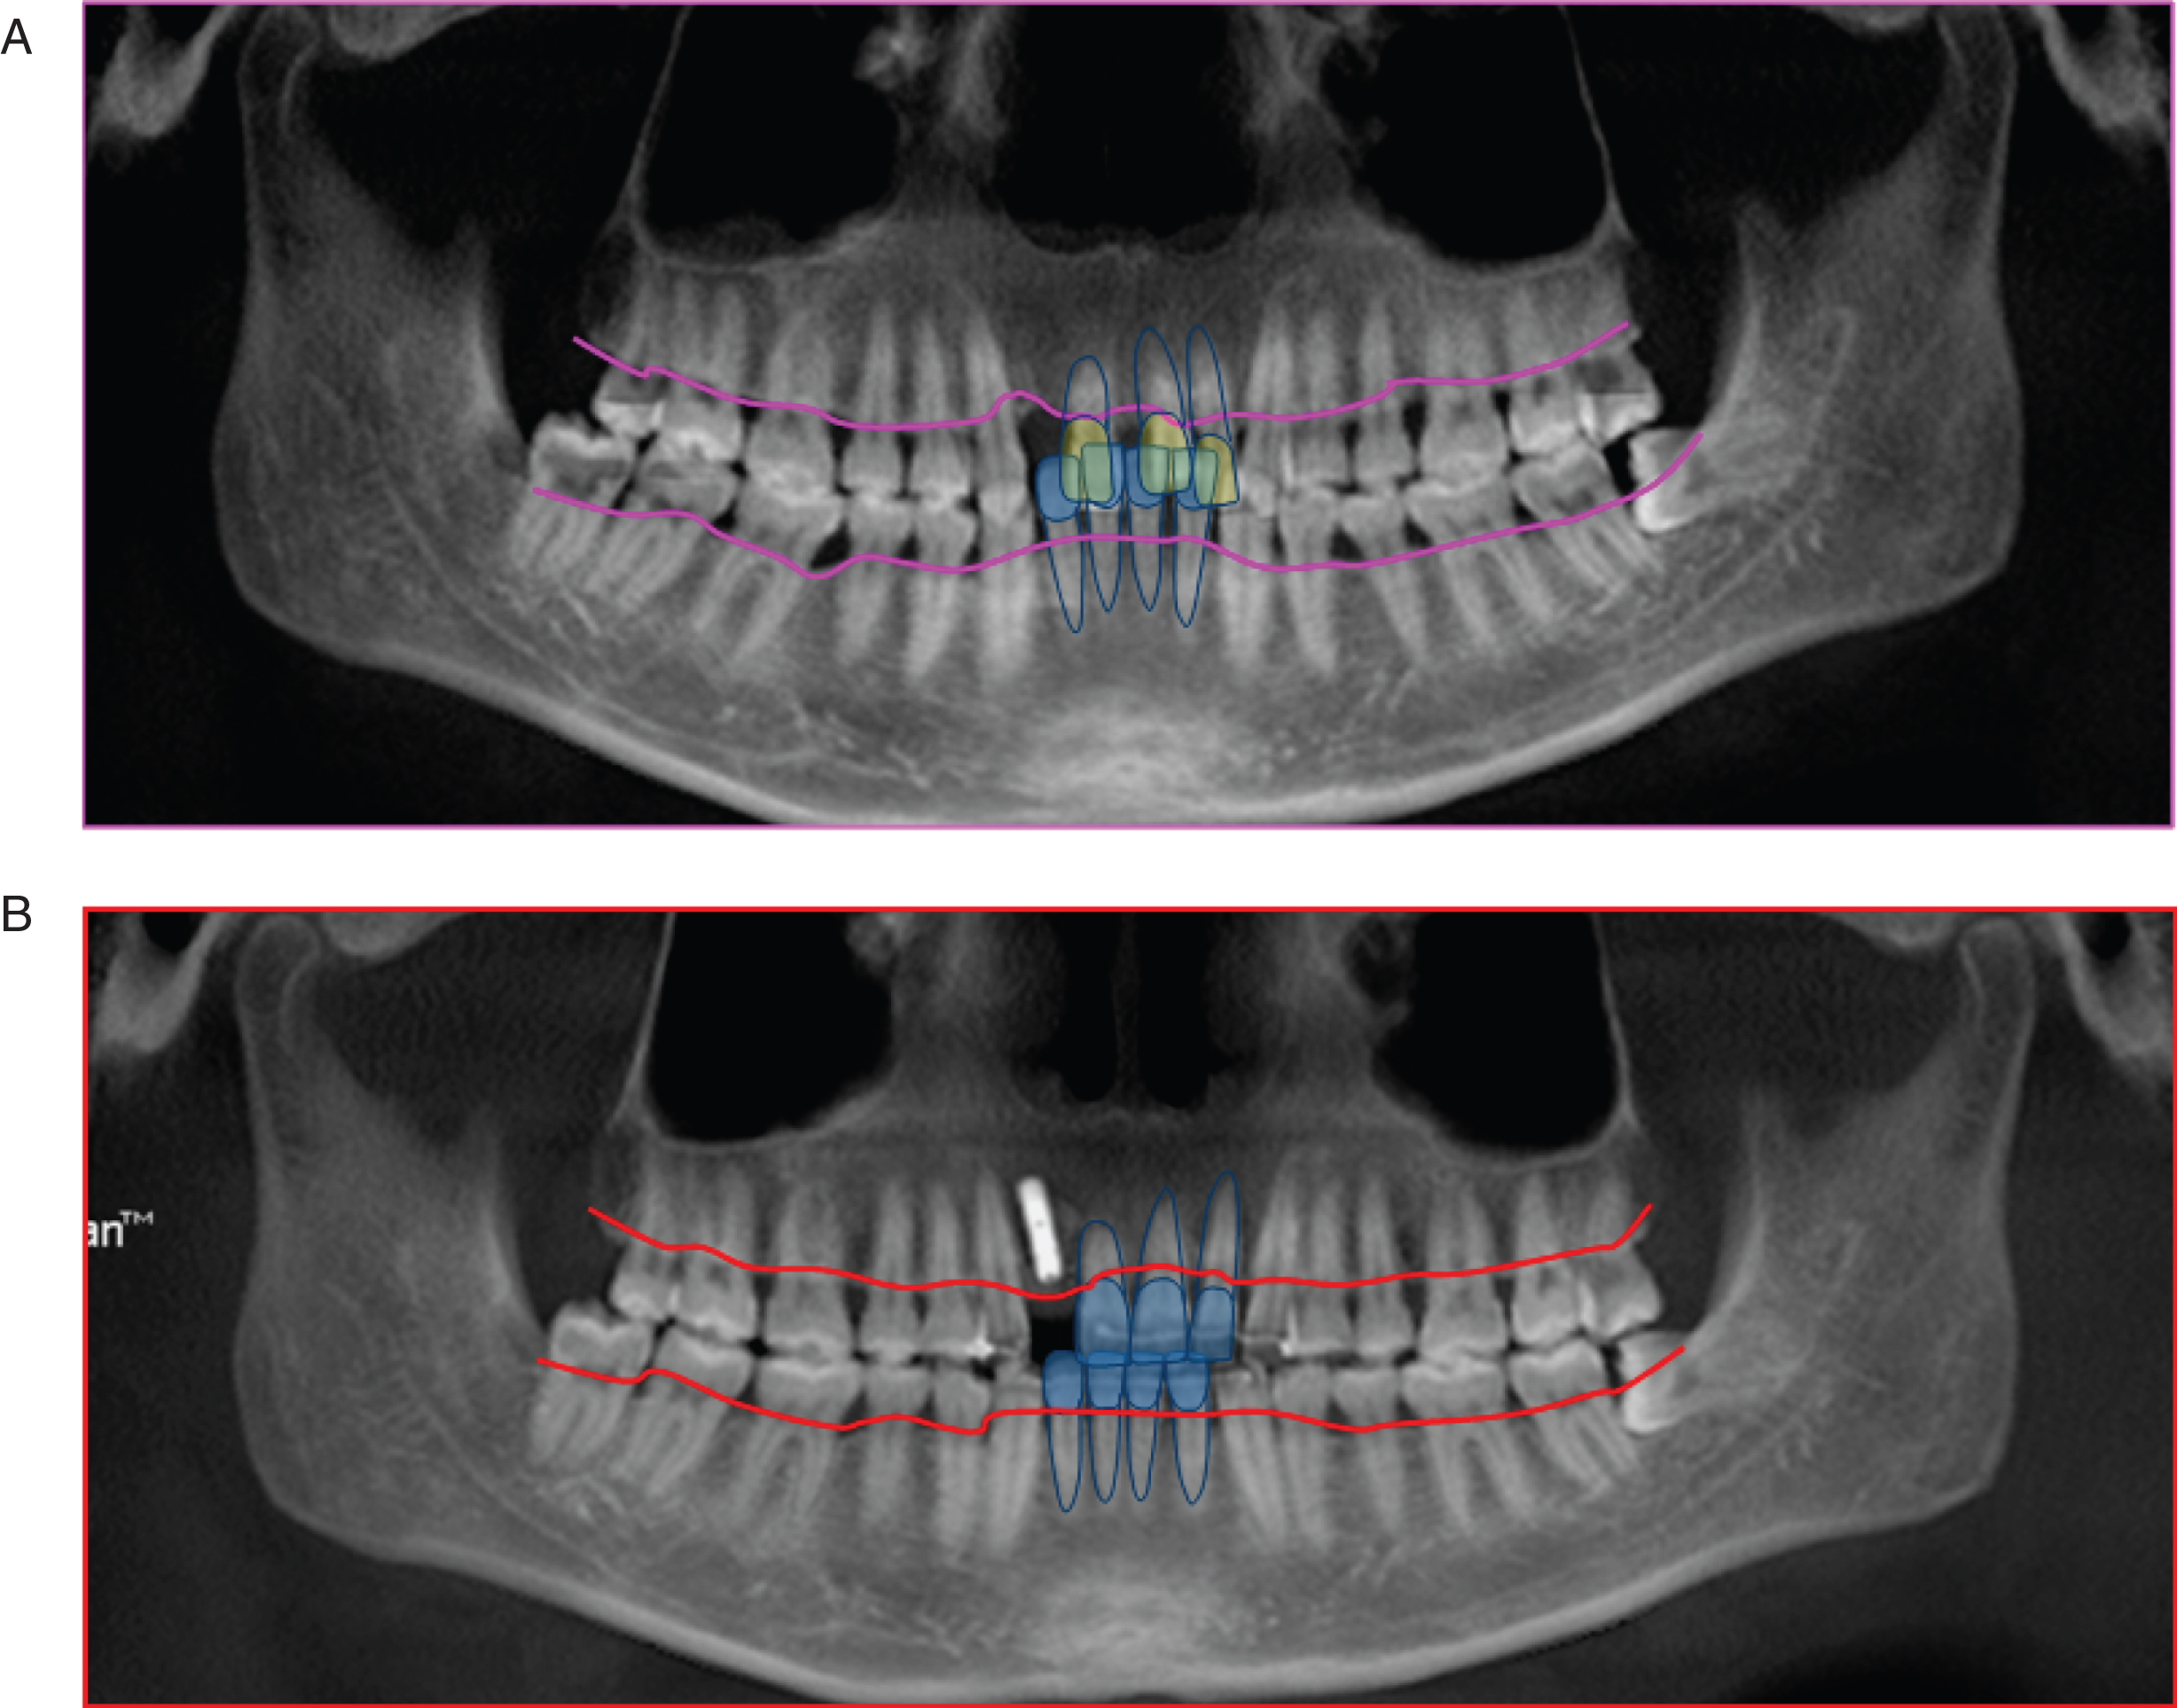 Panoramic radiograph of pre- and post-treatment. A. Panoramic radiograph of pre-treatment; B. Panoramic radiograph of post-treatment. The images showed the relationship between the absorption lines of alveolar bone and the anterior teeth of the uper and lower jaw. The height of alveolar bone in the anterior region was significantly increased.